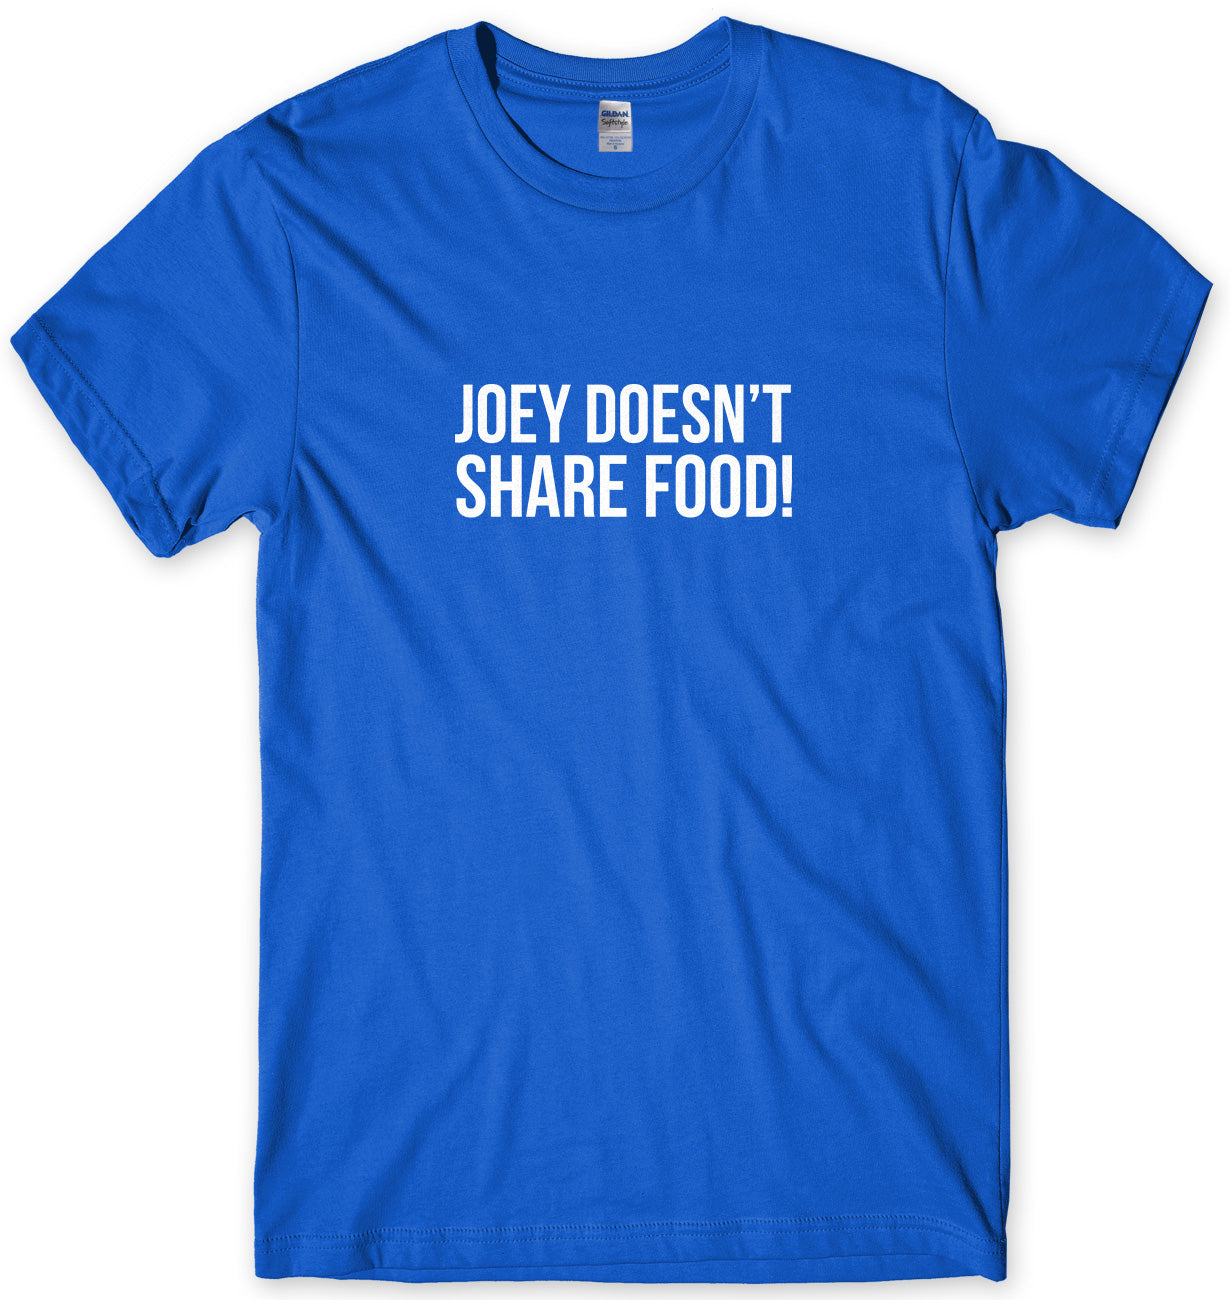 Joey Doesn't Share Food Mens Unisex T-Shirt